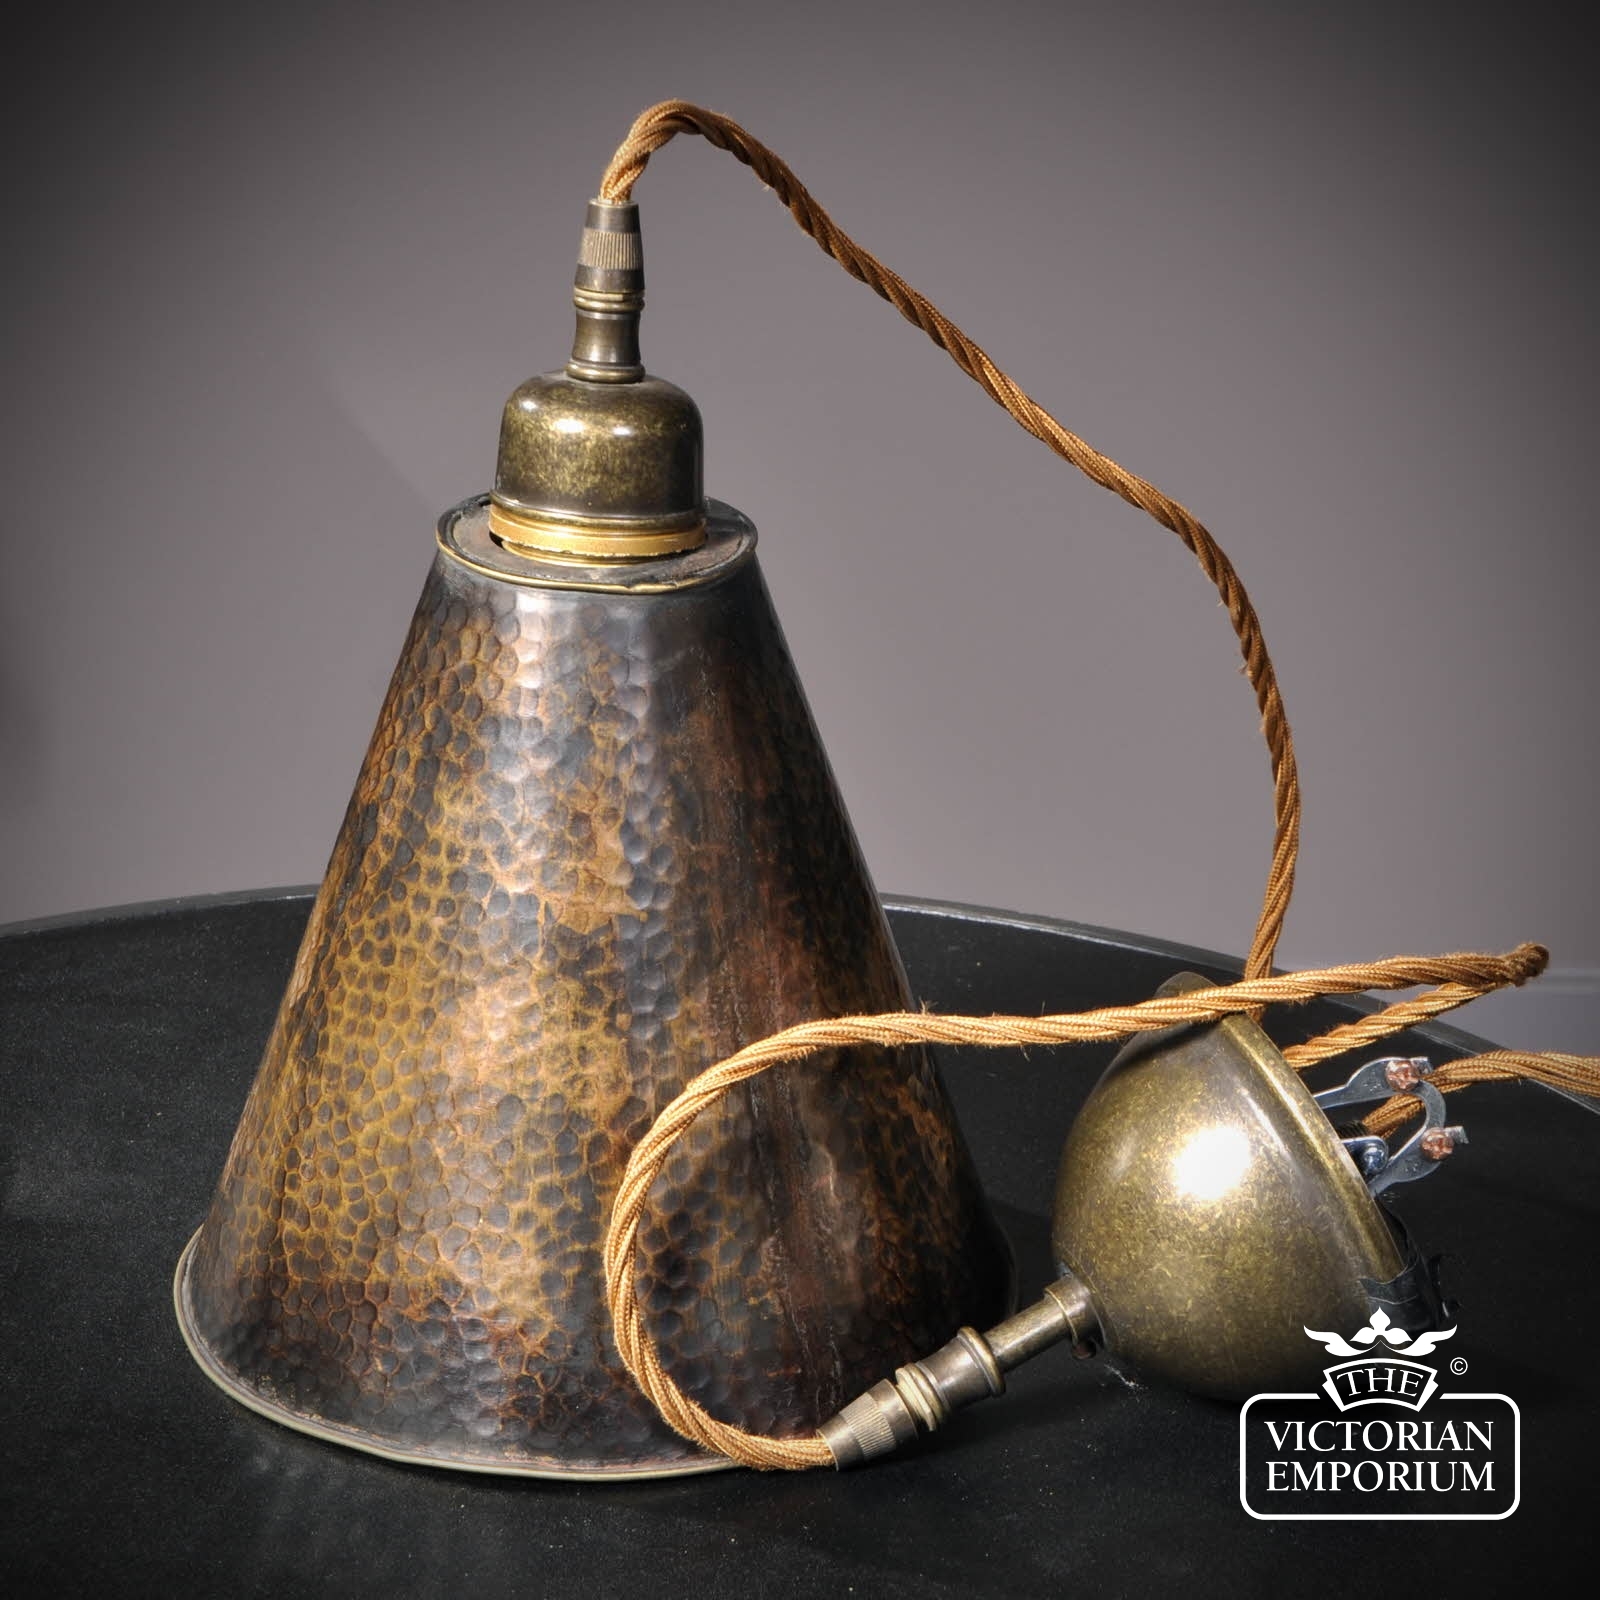 Vintage Copper Lamp Shade With Antique Style Cable